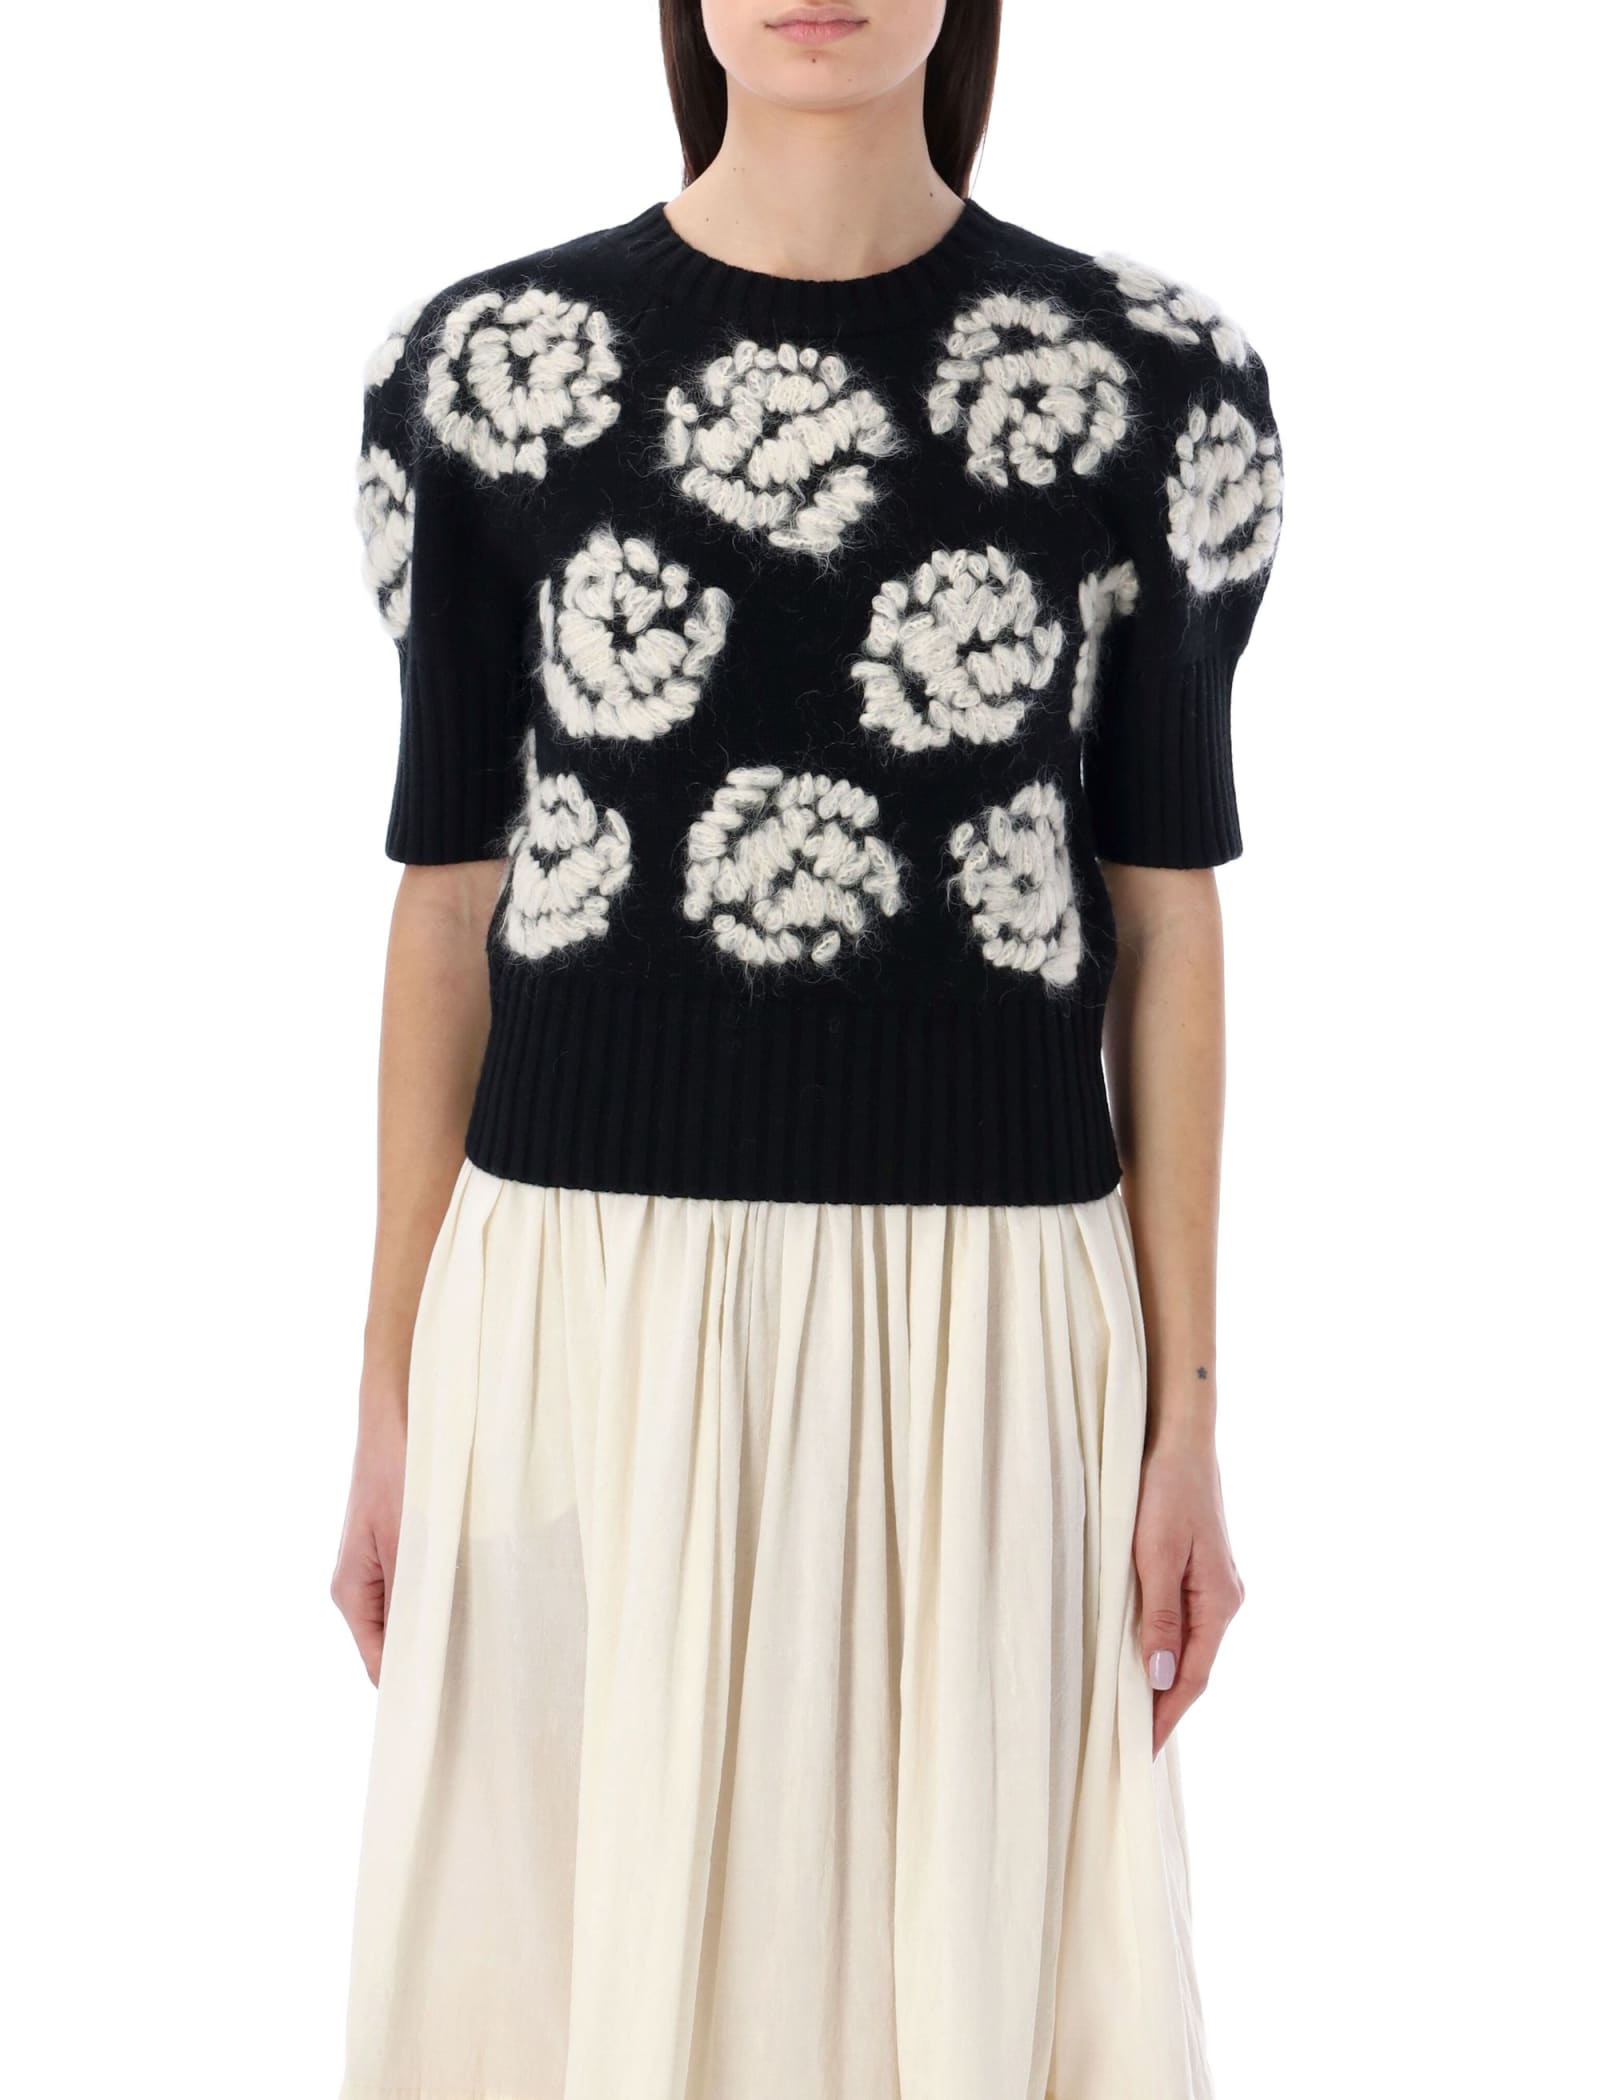 TORY BURCH ROSE-EMBROIDERED SWEATER